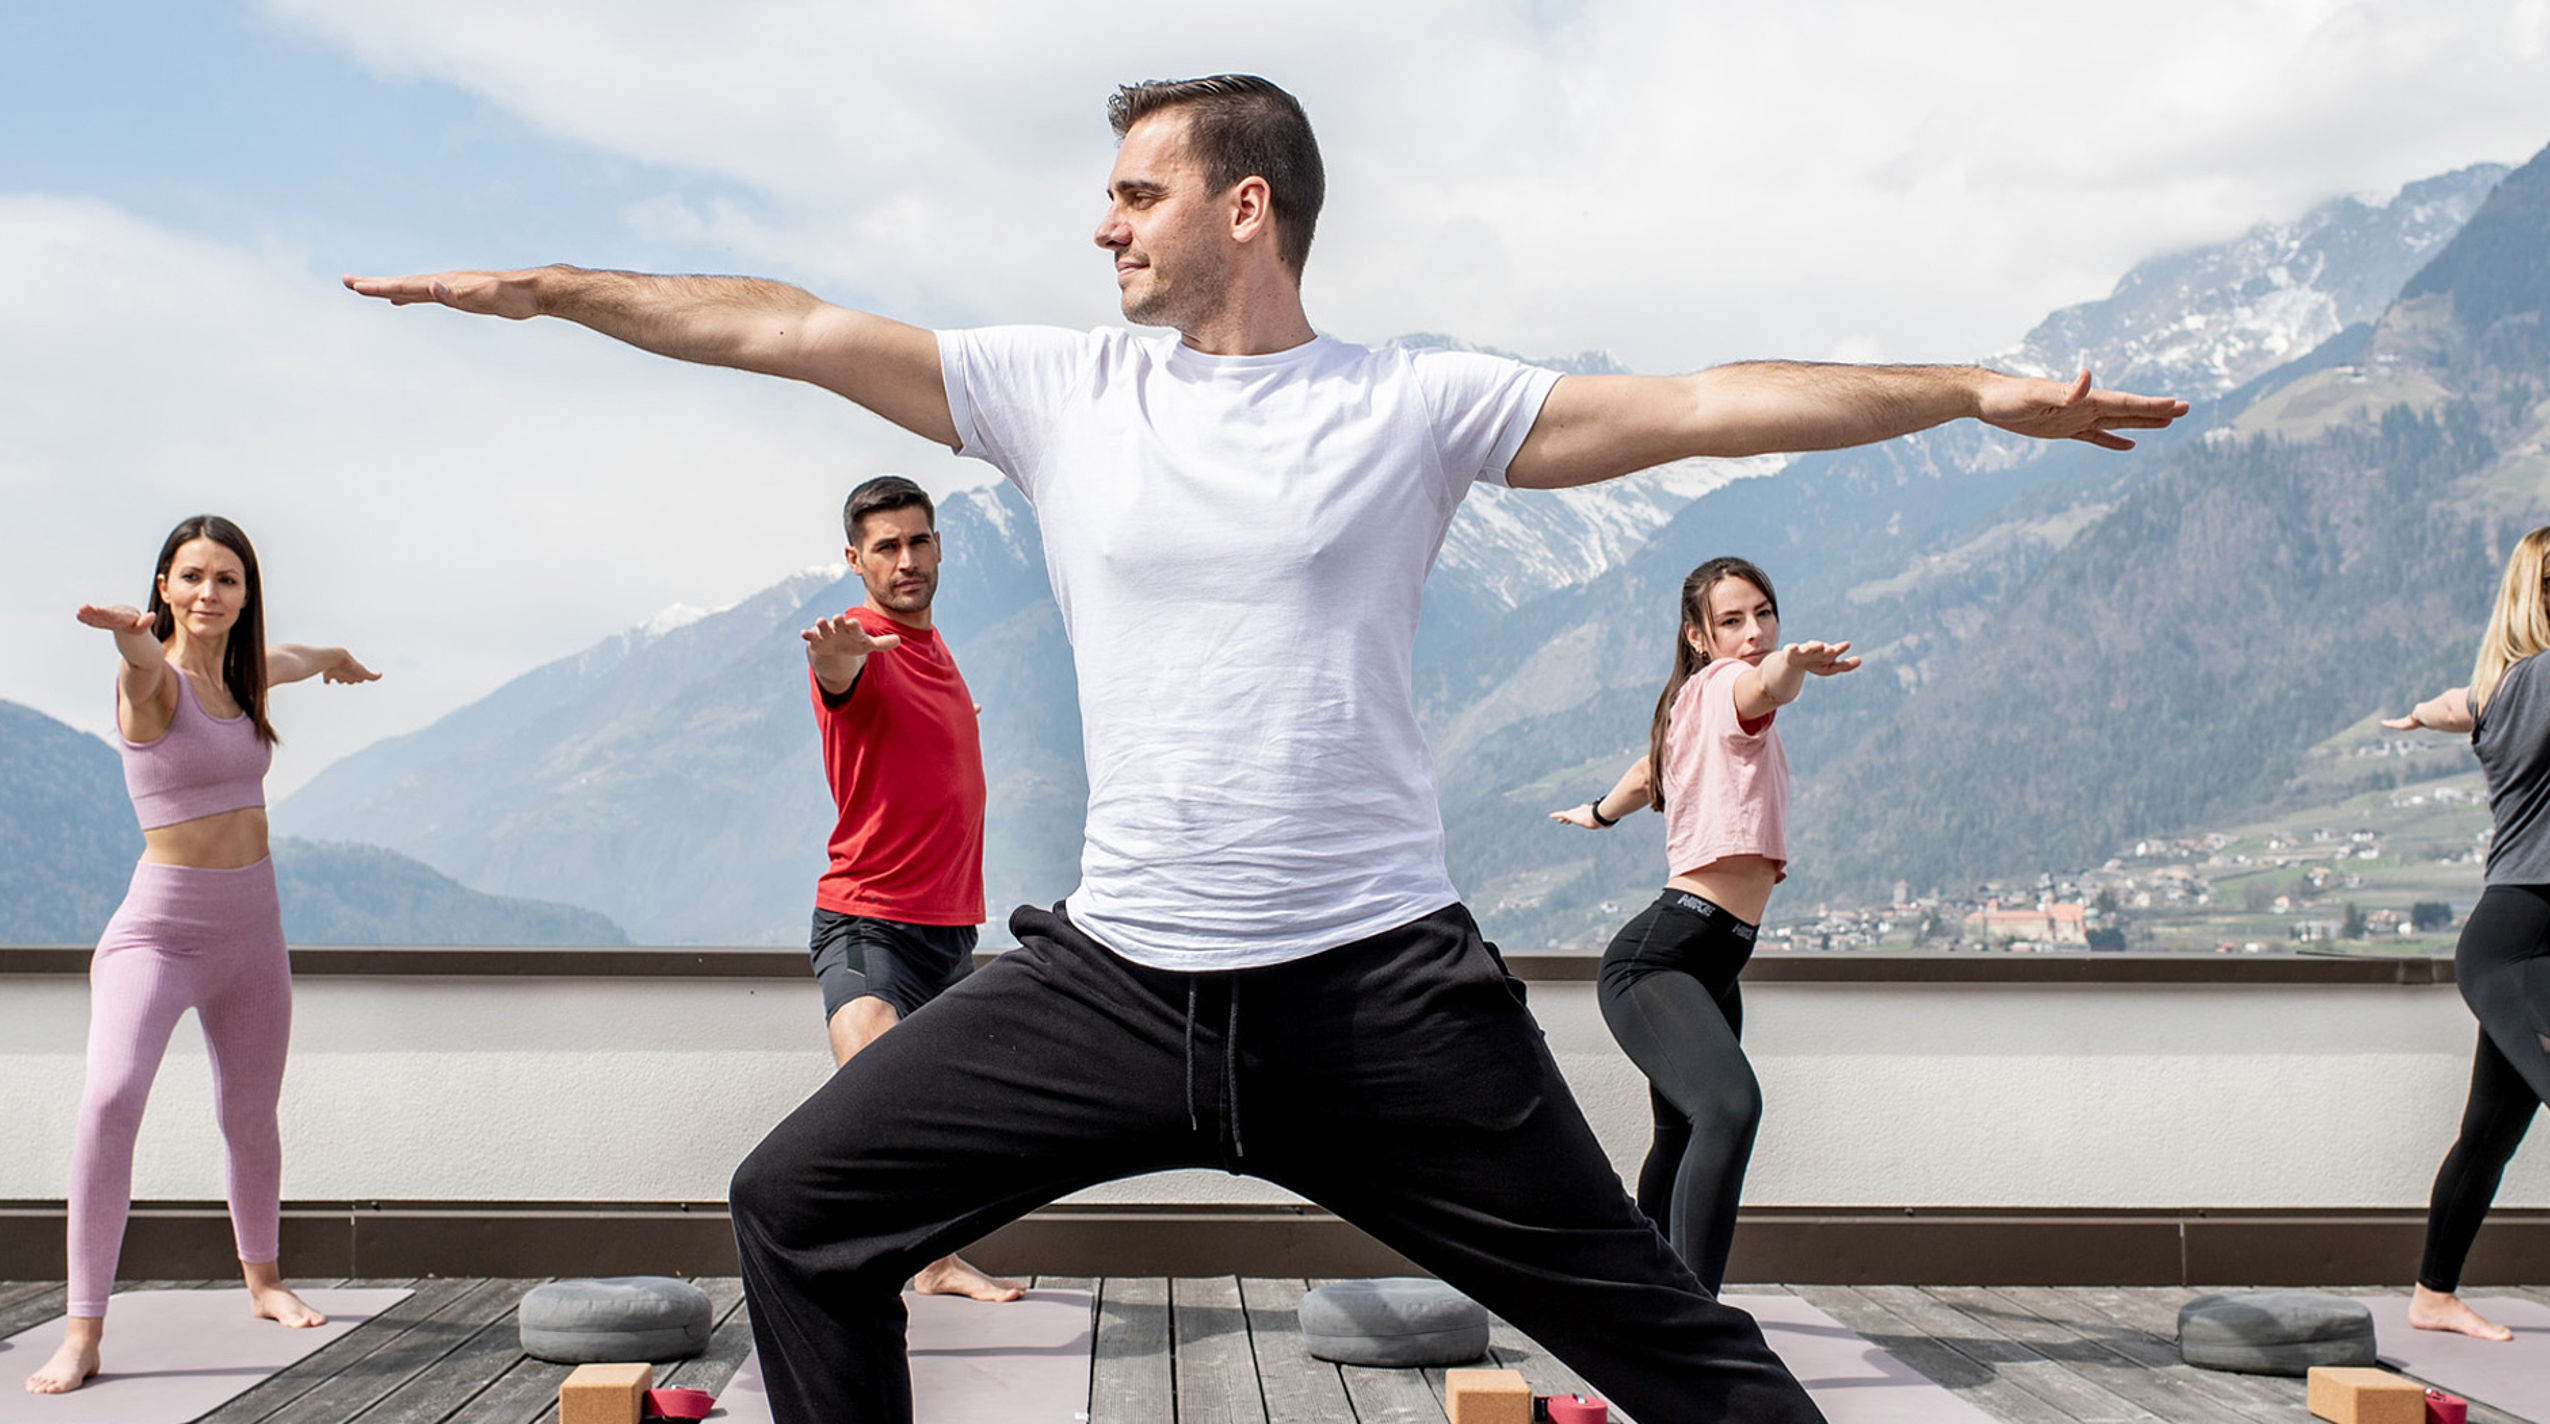 Man in white T-shirt shows yoga pose, other four follow suit